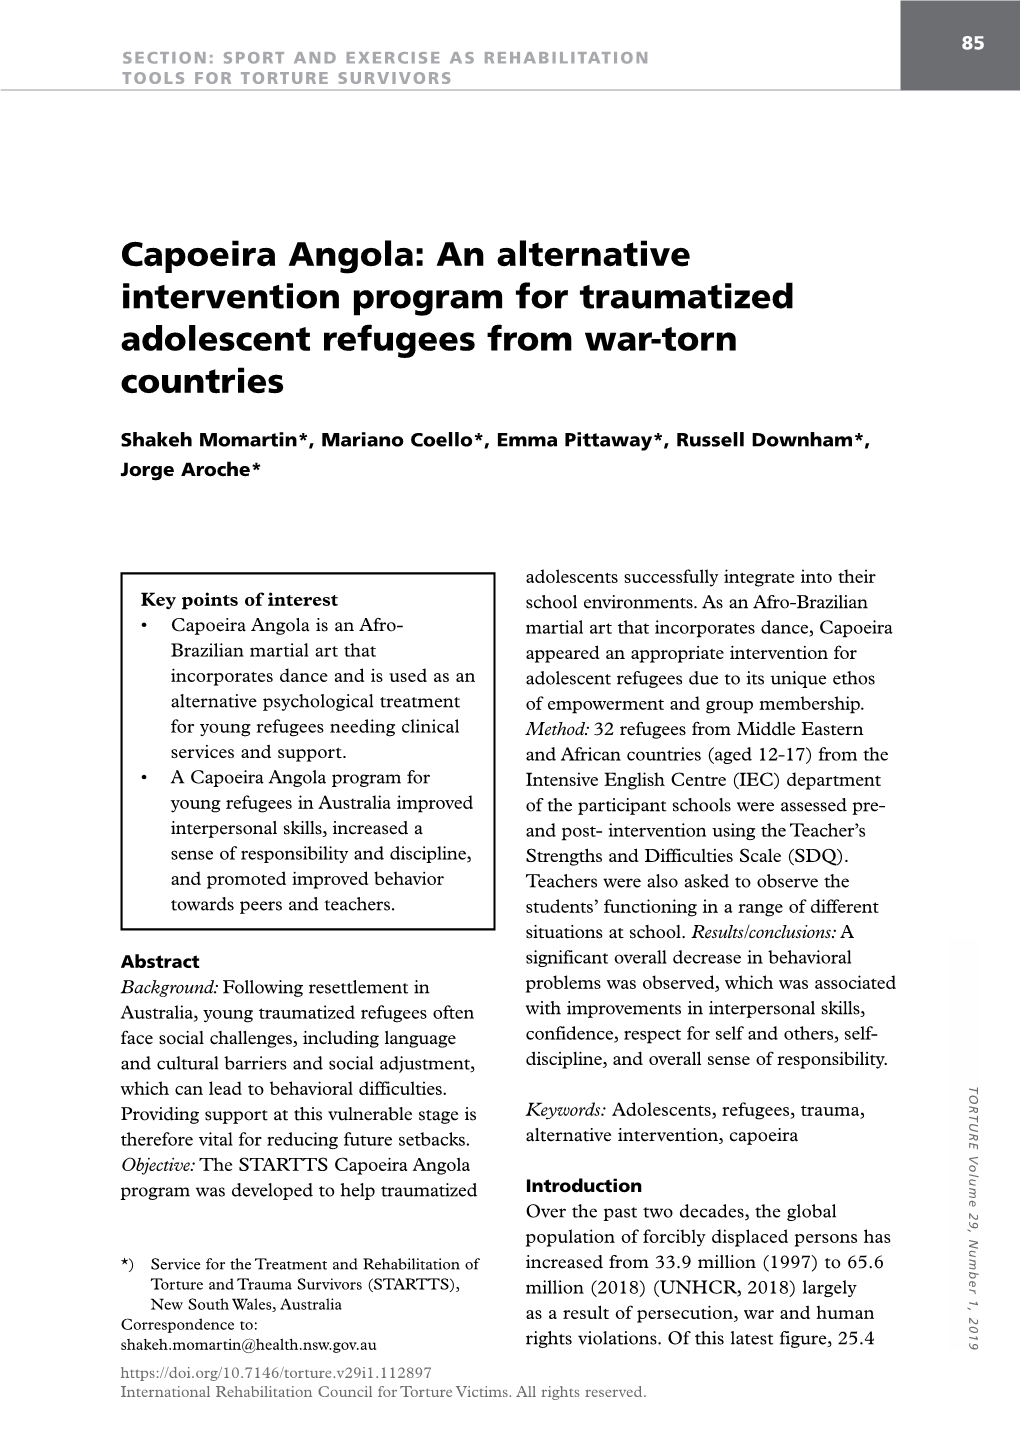 Capoeira Angola: an Alternative Intervention Program for Traumatized Adolescent Refugees from War-Torn Countries